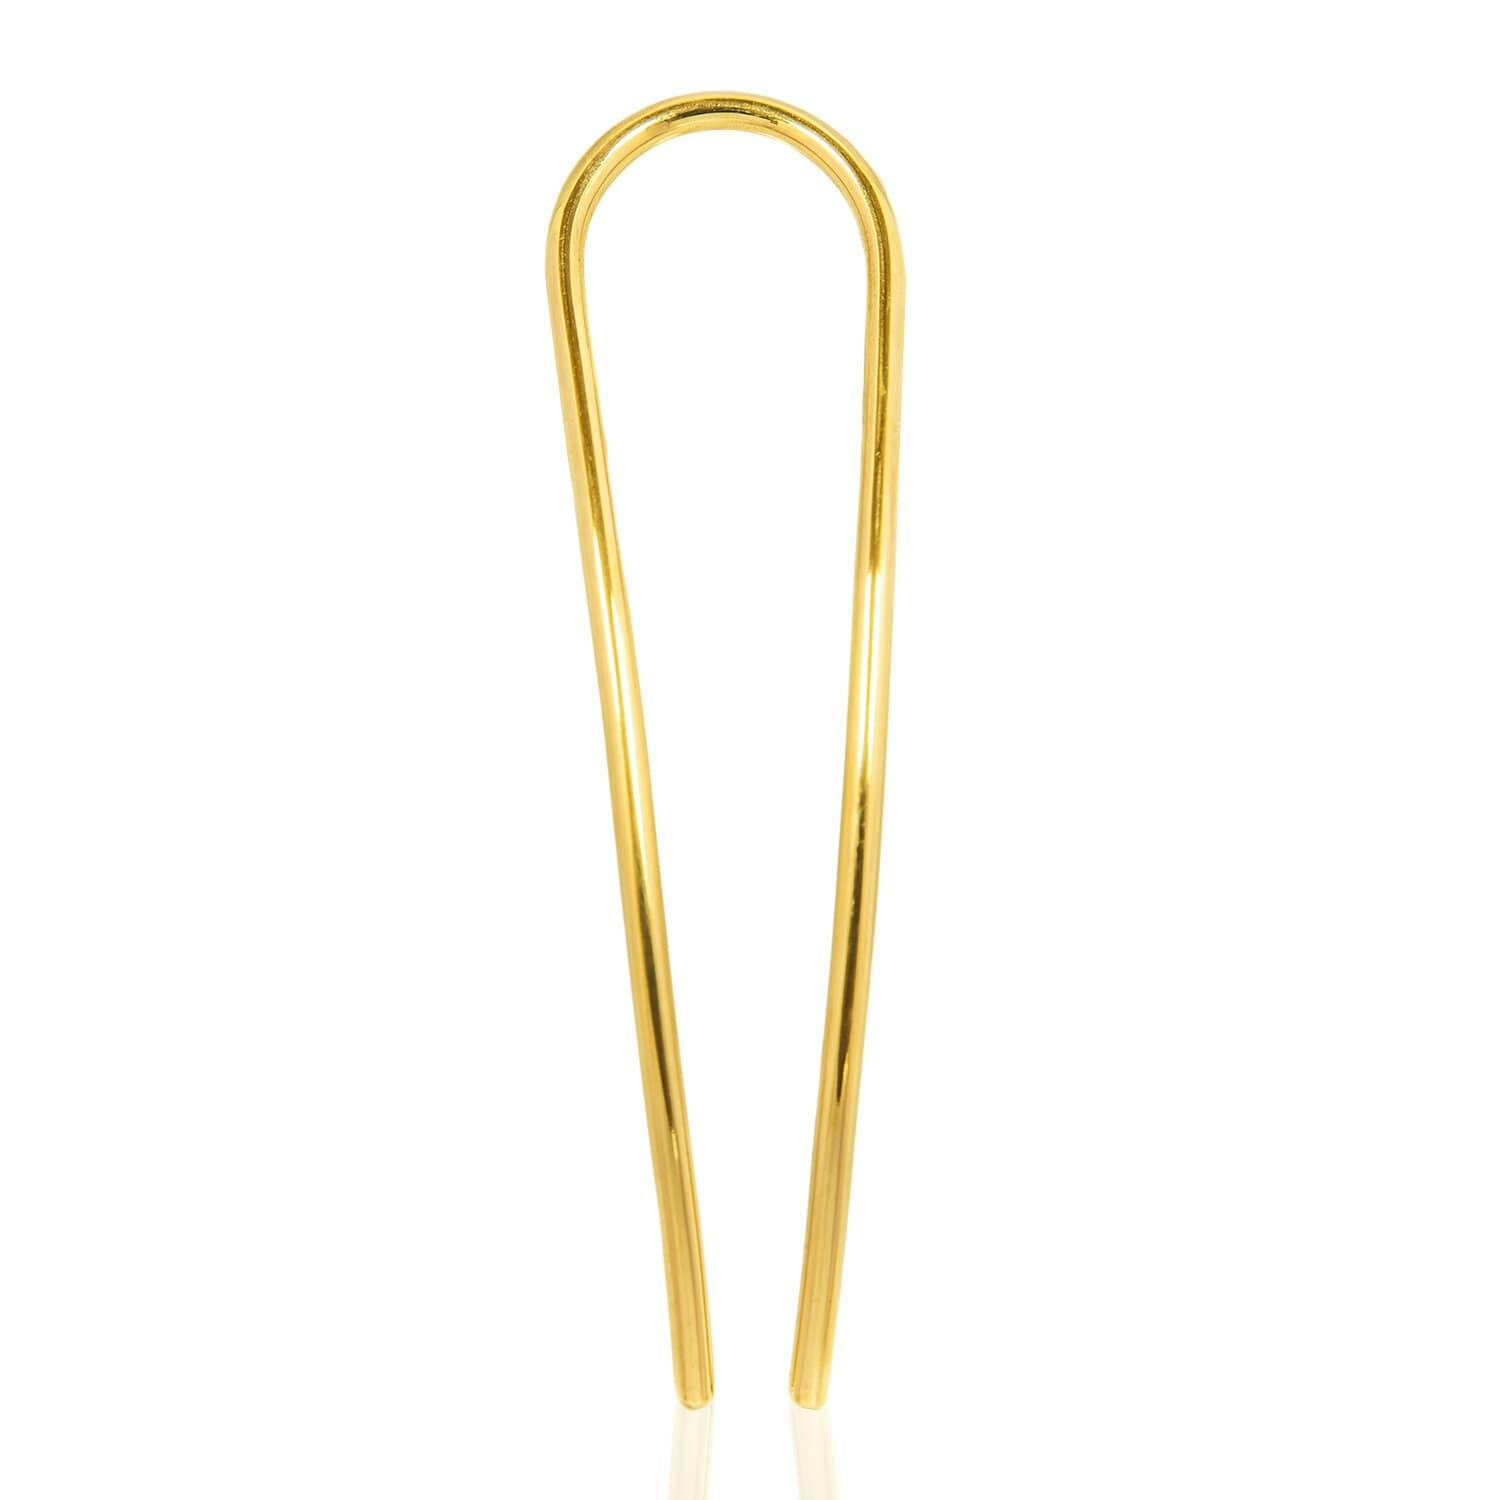 Mandare Hairpin, a product by Adele Dejak